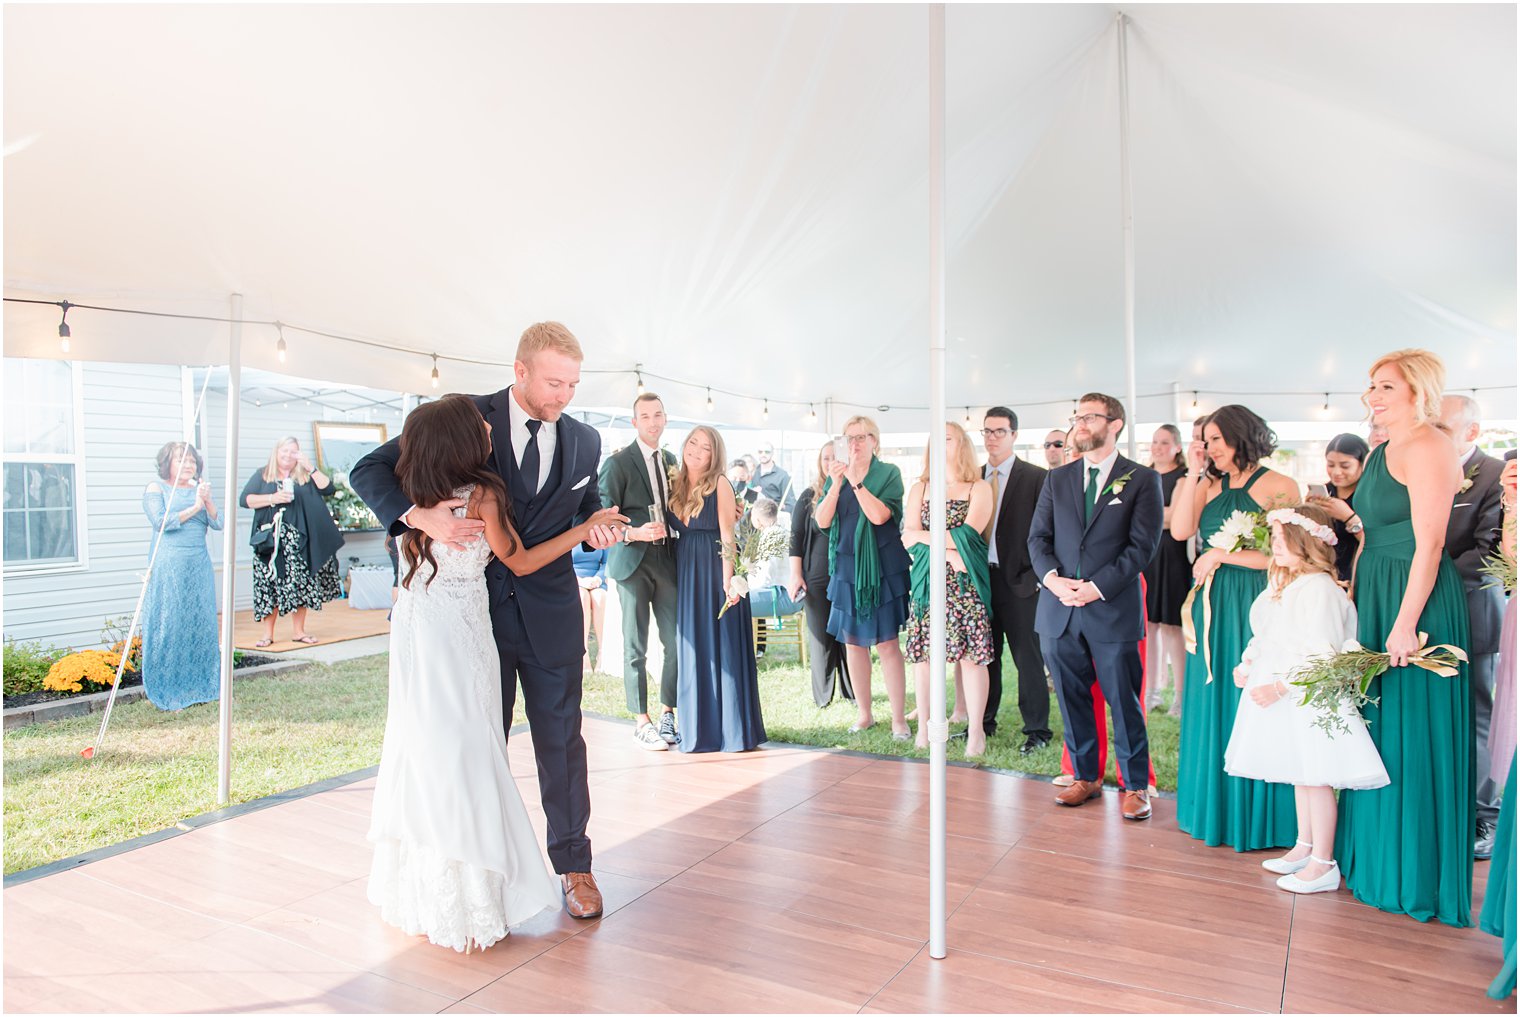 bride and groom dance during tented wedding reception in backyard